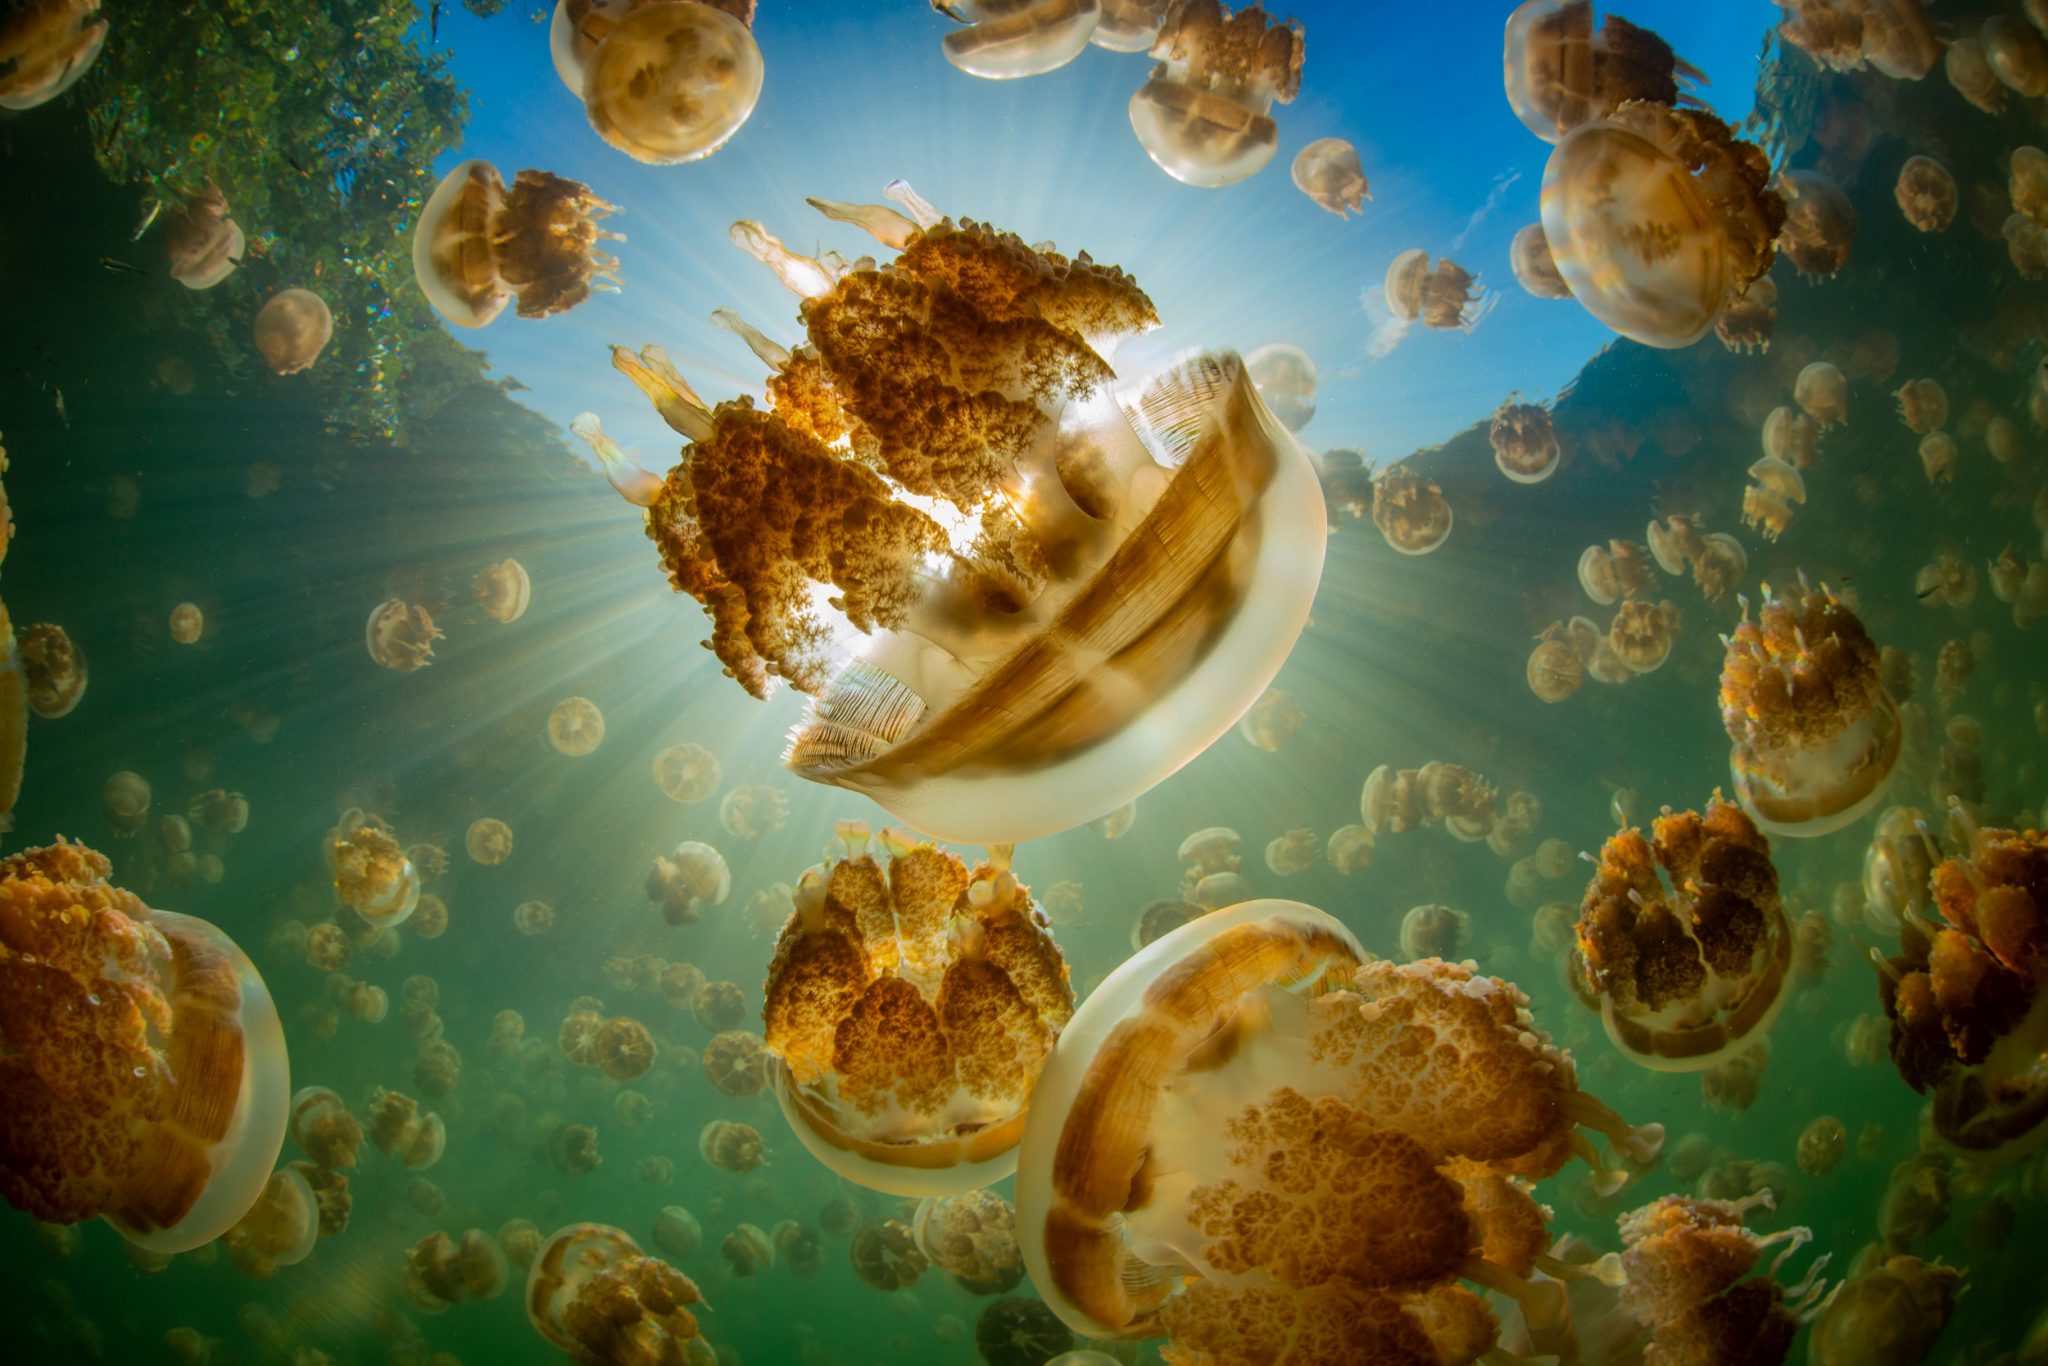 Hundreds of golden jellyfish in Palau, where snorkelers and freedivers can swim among them for a unique marine encounter